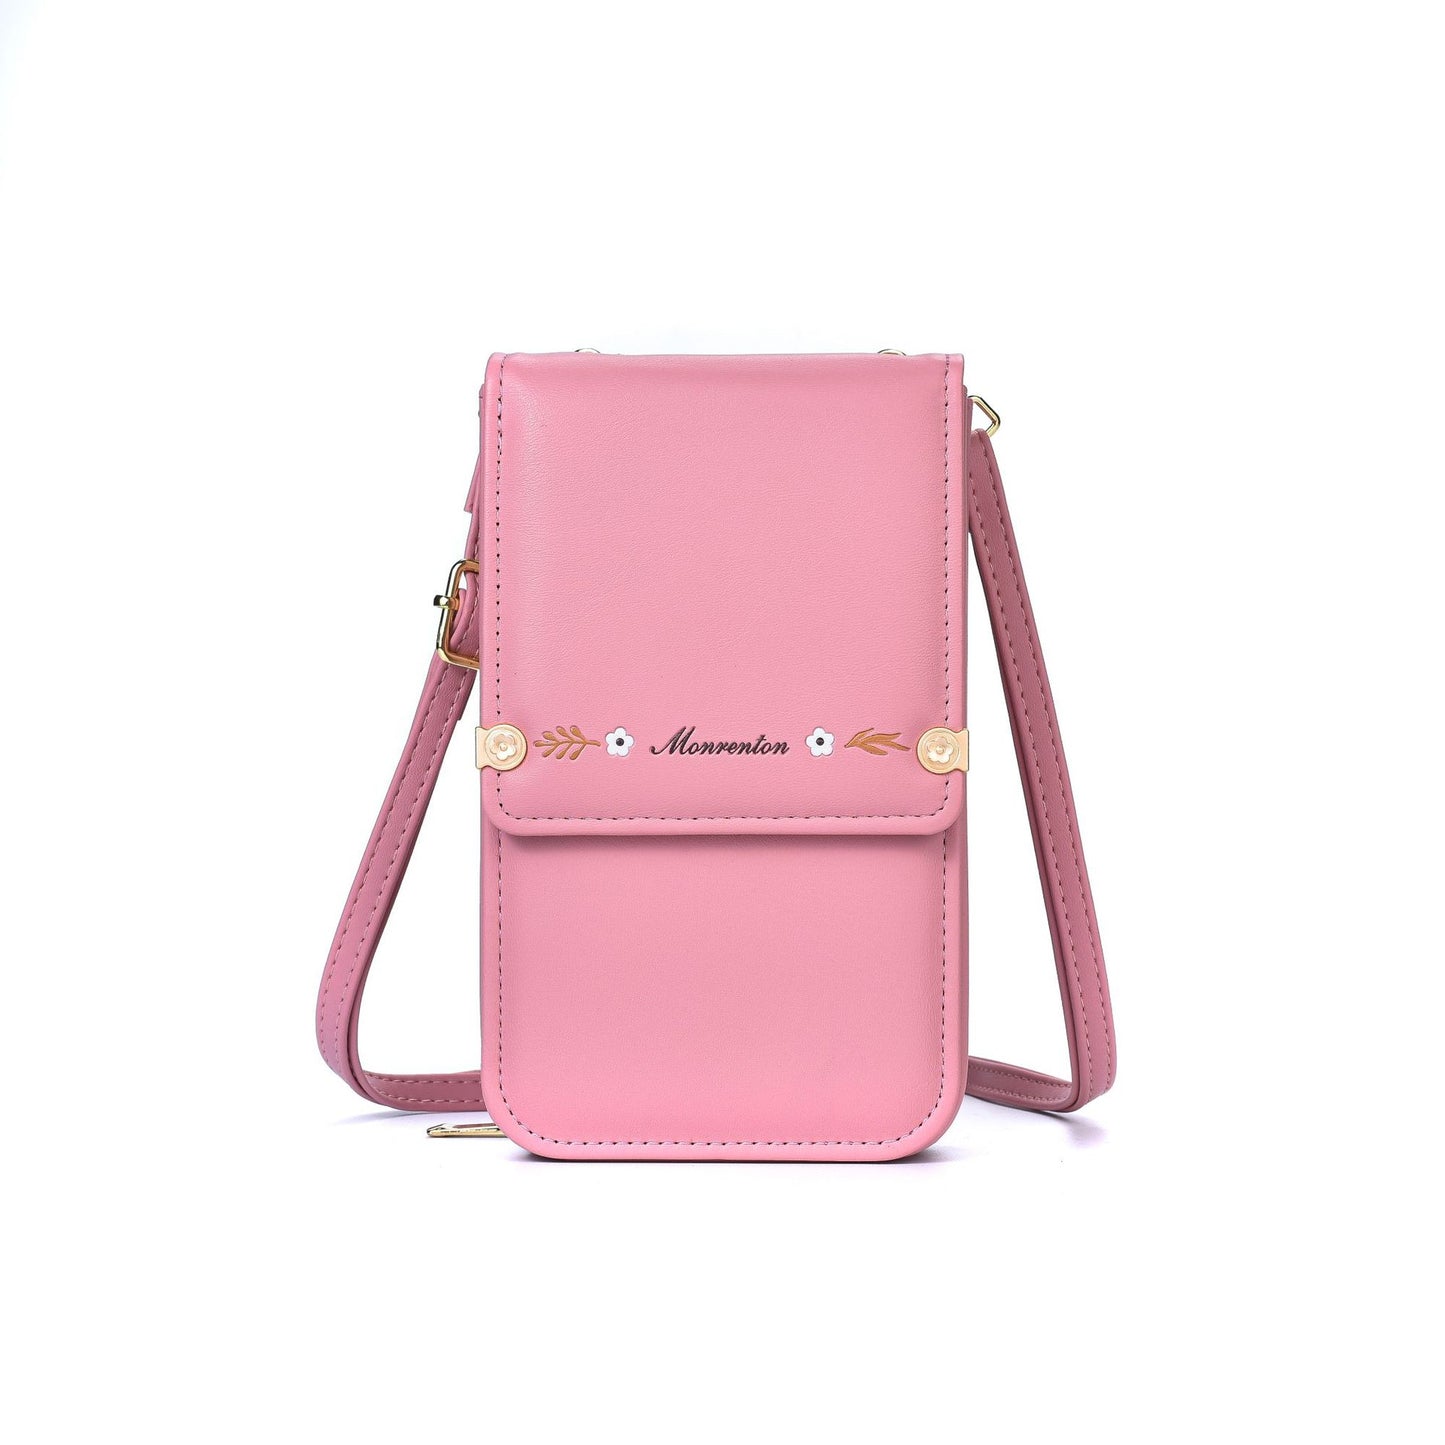 Flowers Embroidery Mobile Phone Bag pink color 